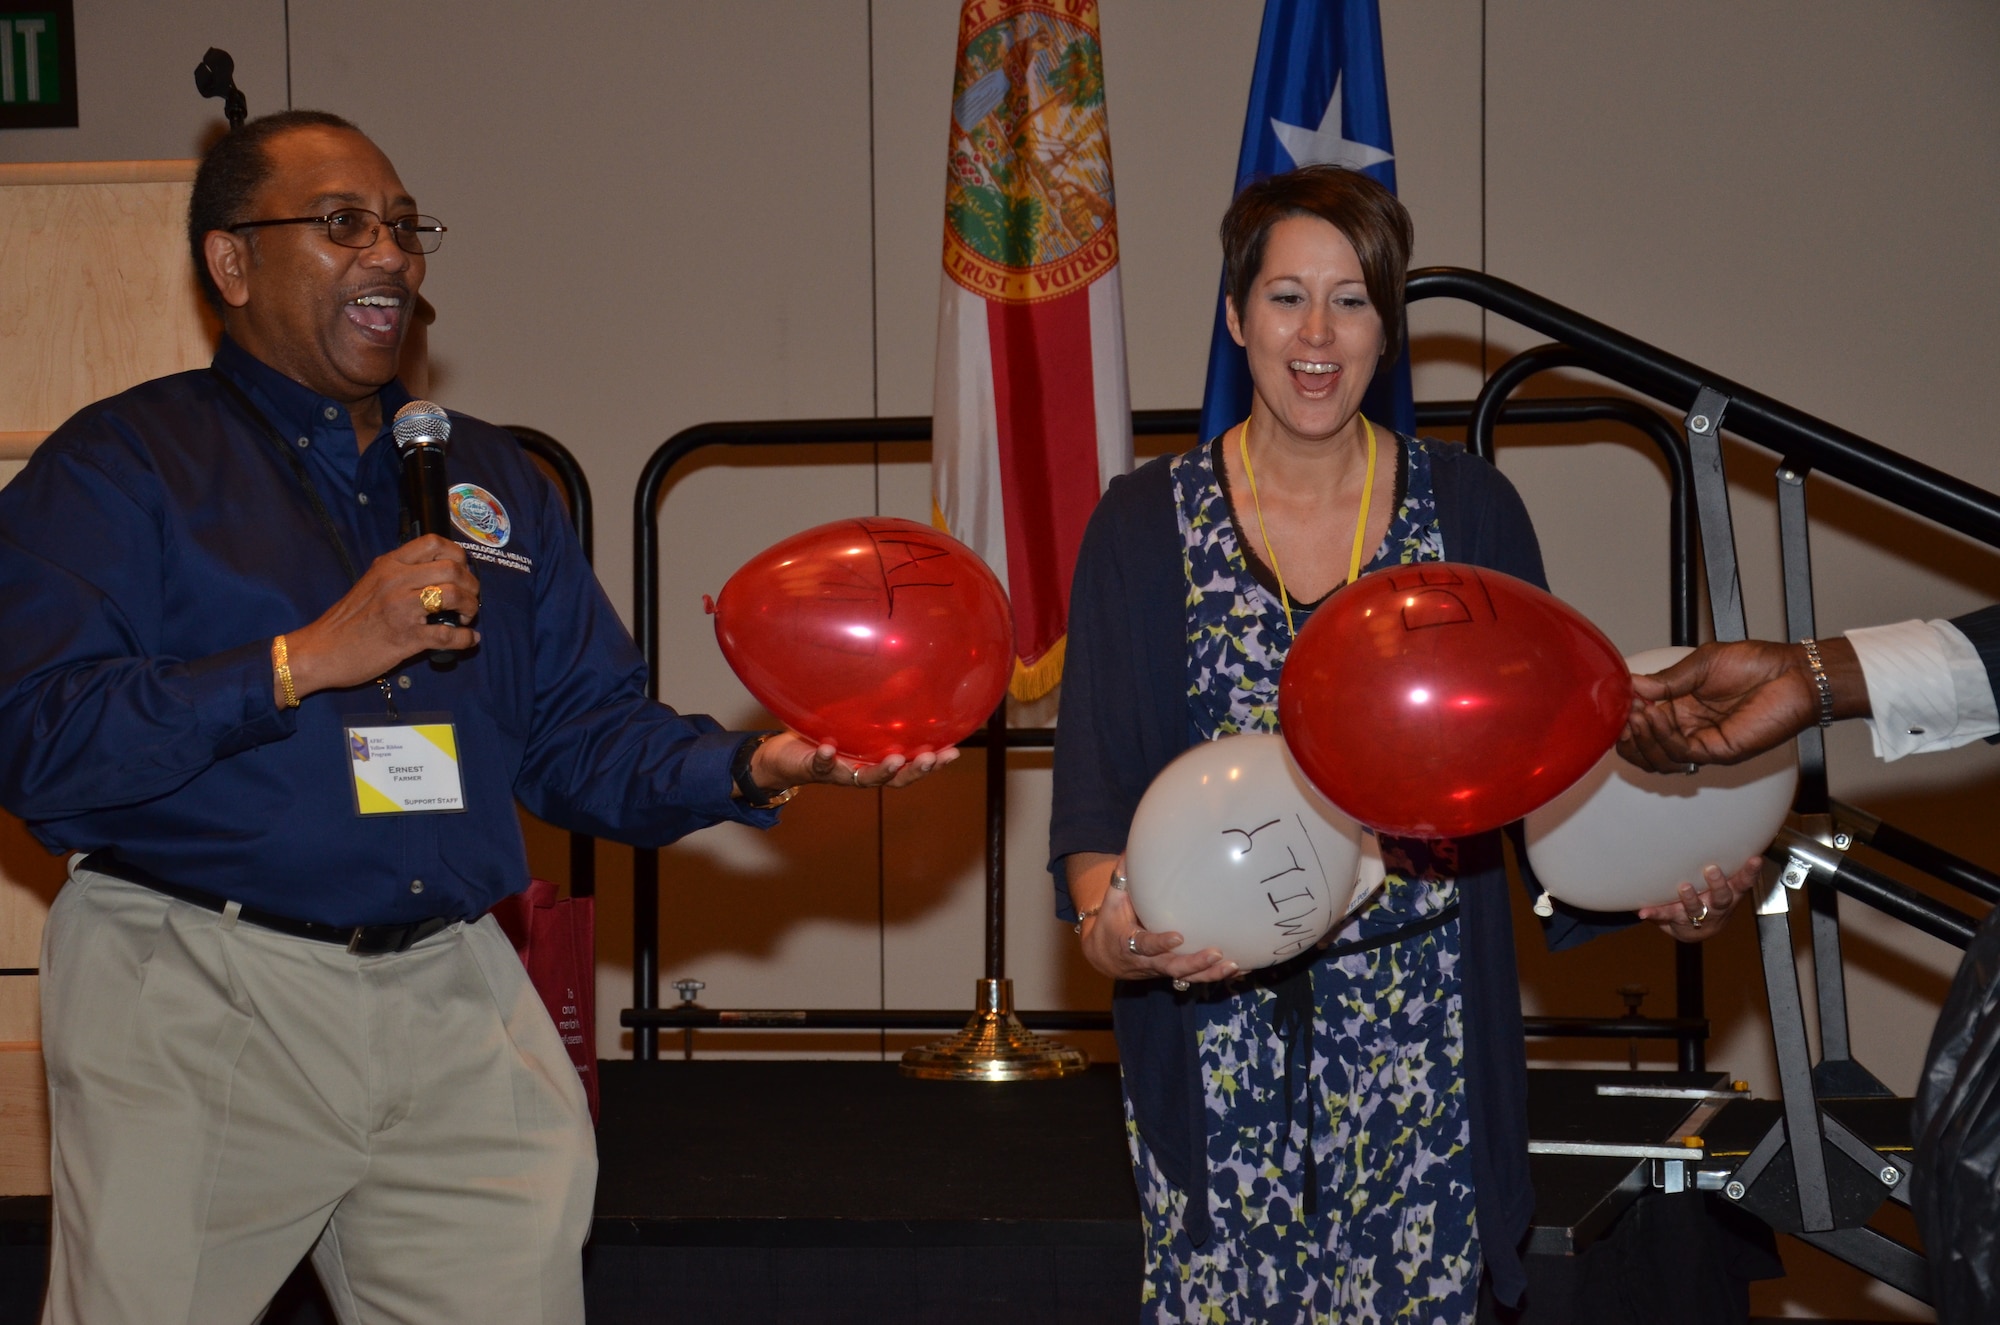 An Air Force Psychological Health Advocacy Program representative uses an audience member and balloons to help demonstrate the difficulties Reservists have juggling different aspects of their lives at an Air Force Reserve Command Yellow Ribbon Event in Orlando, Fla., Dec. 17, 2011. PHAP services were available for pre- and post-deployment Reservists and family members to speak with and seek guidance over the course of the weekend event. (U.S. Air Force photo/Staff Sgt. Anna-Marie Wyant)